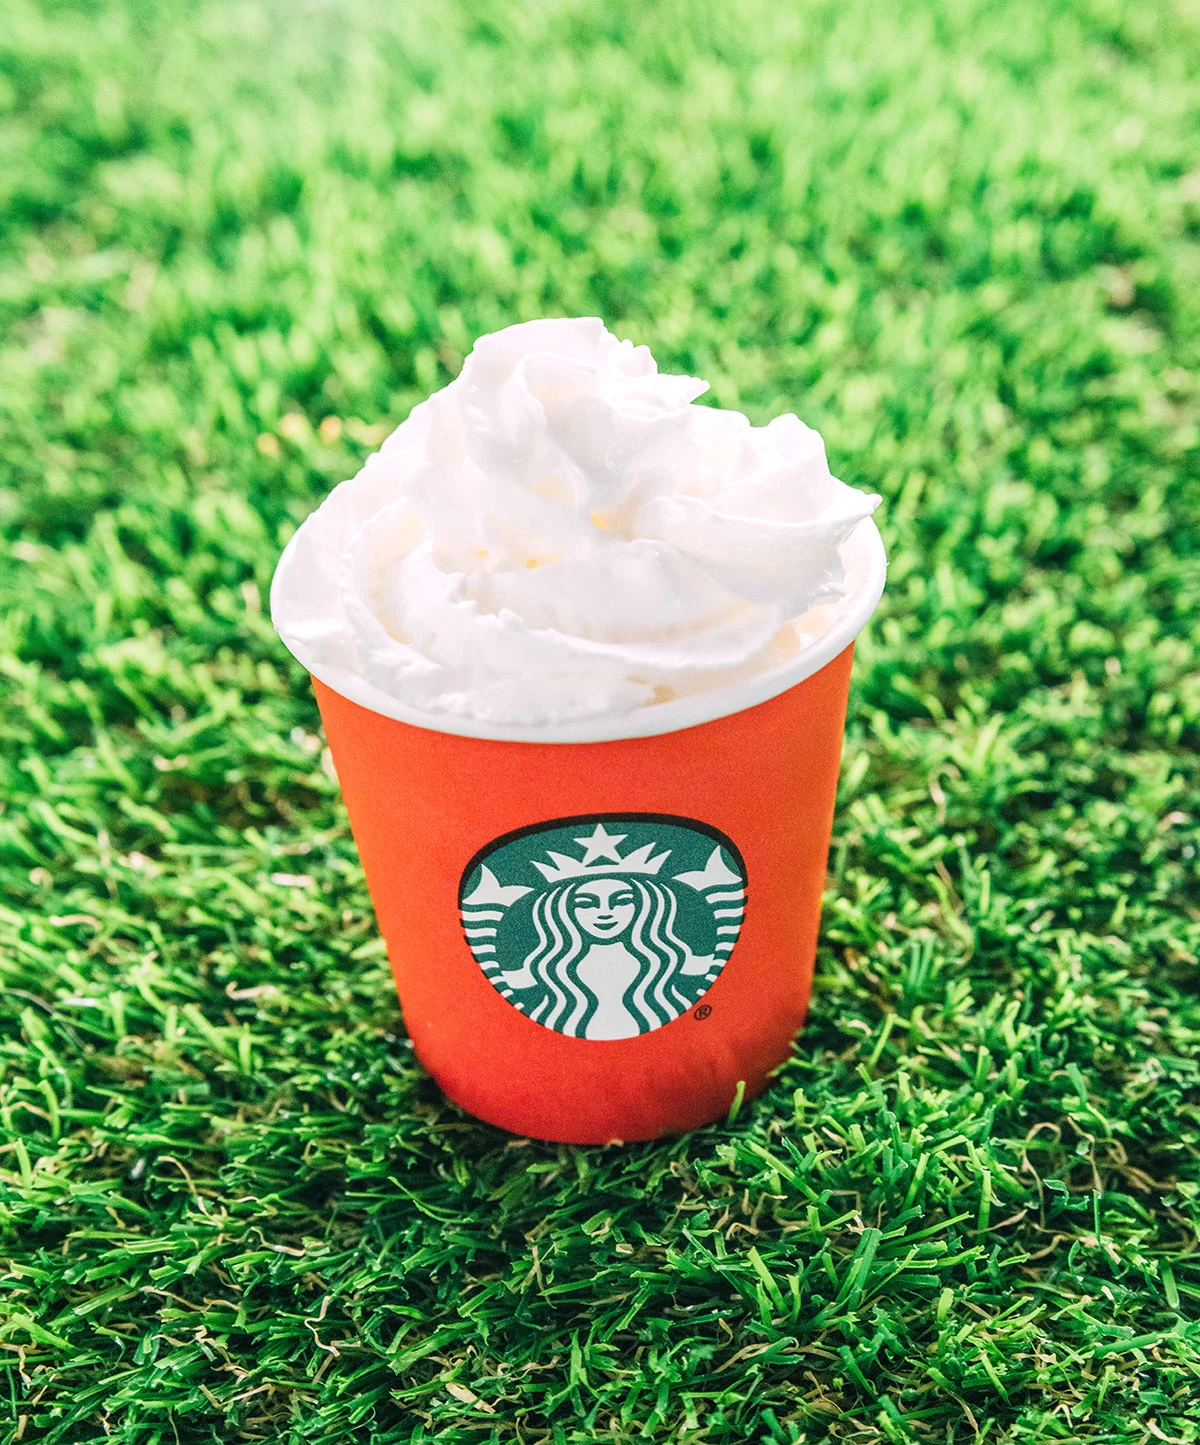 Whipped cream in a mini red starbucks cups.